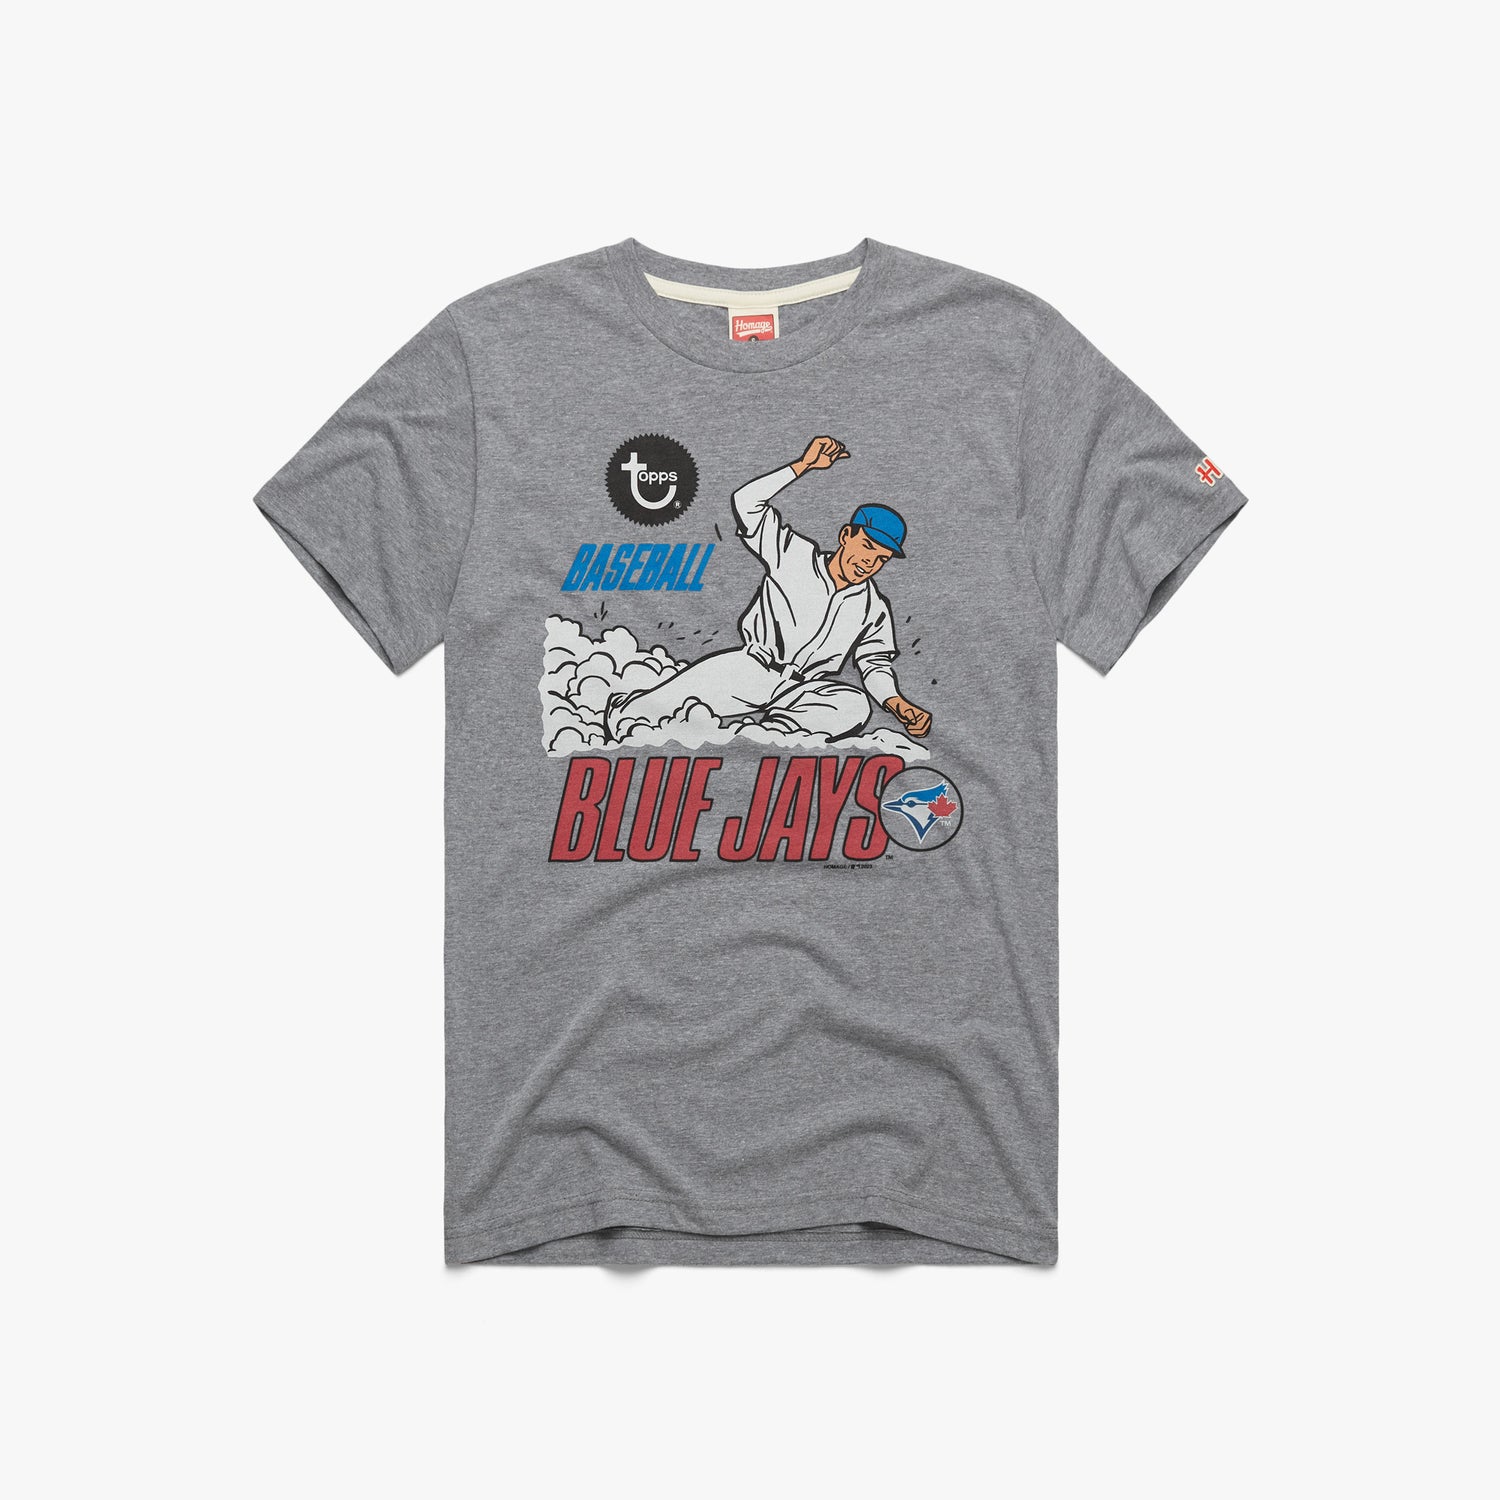 MLB x Topps Toronto Blue Jays T-Shirt from Homage. | Grey | Vintage Apparel from Homage.